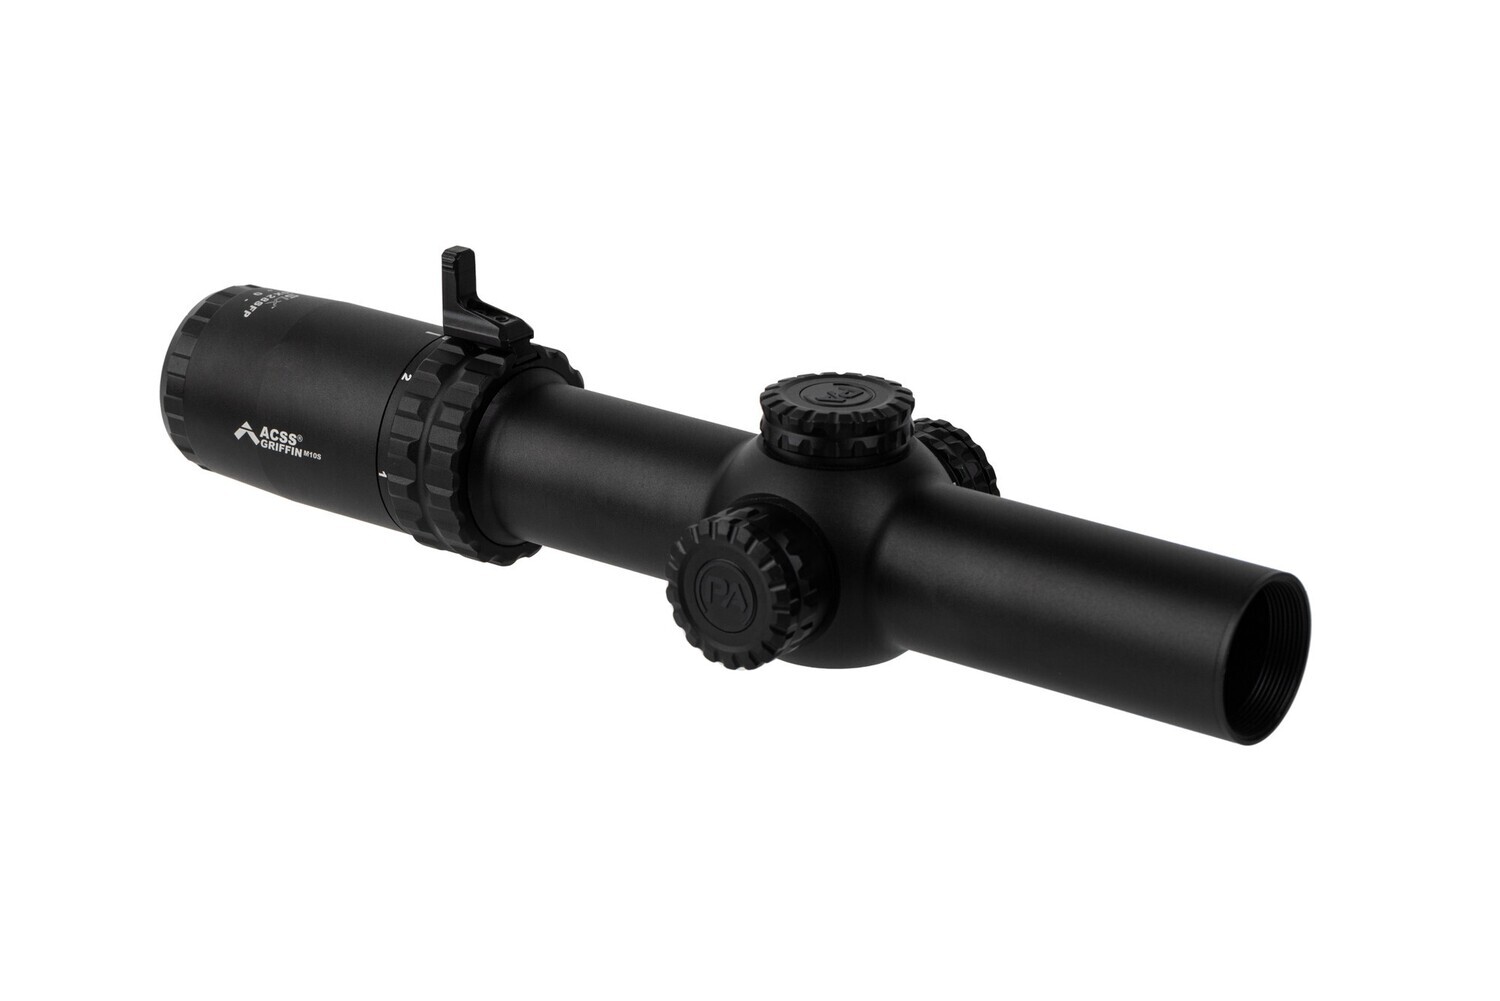 Primary Arms SLx 1-10x28mm SFP Rifle Scope - Illuminated ACSS Griffin